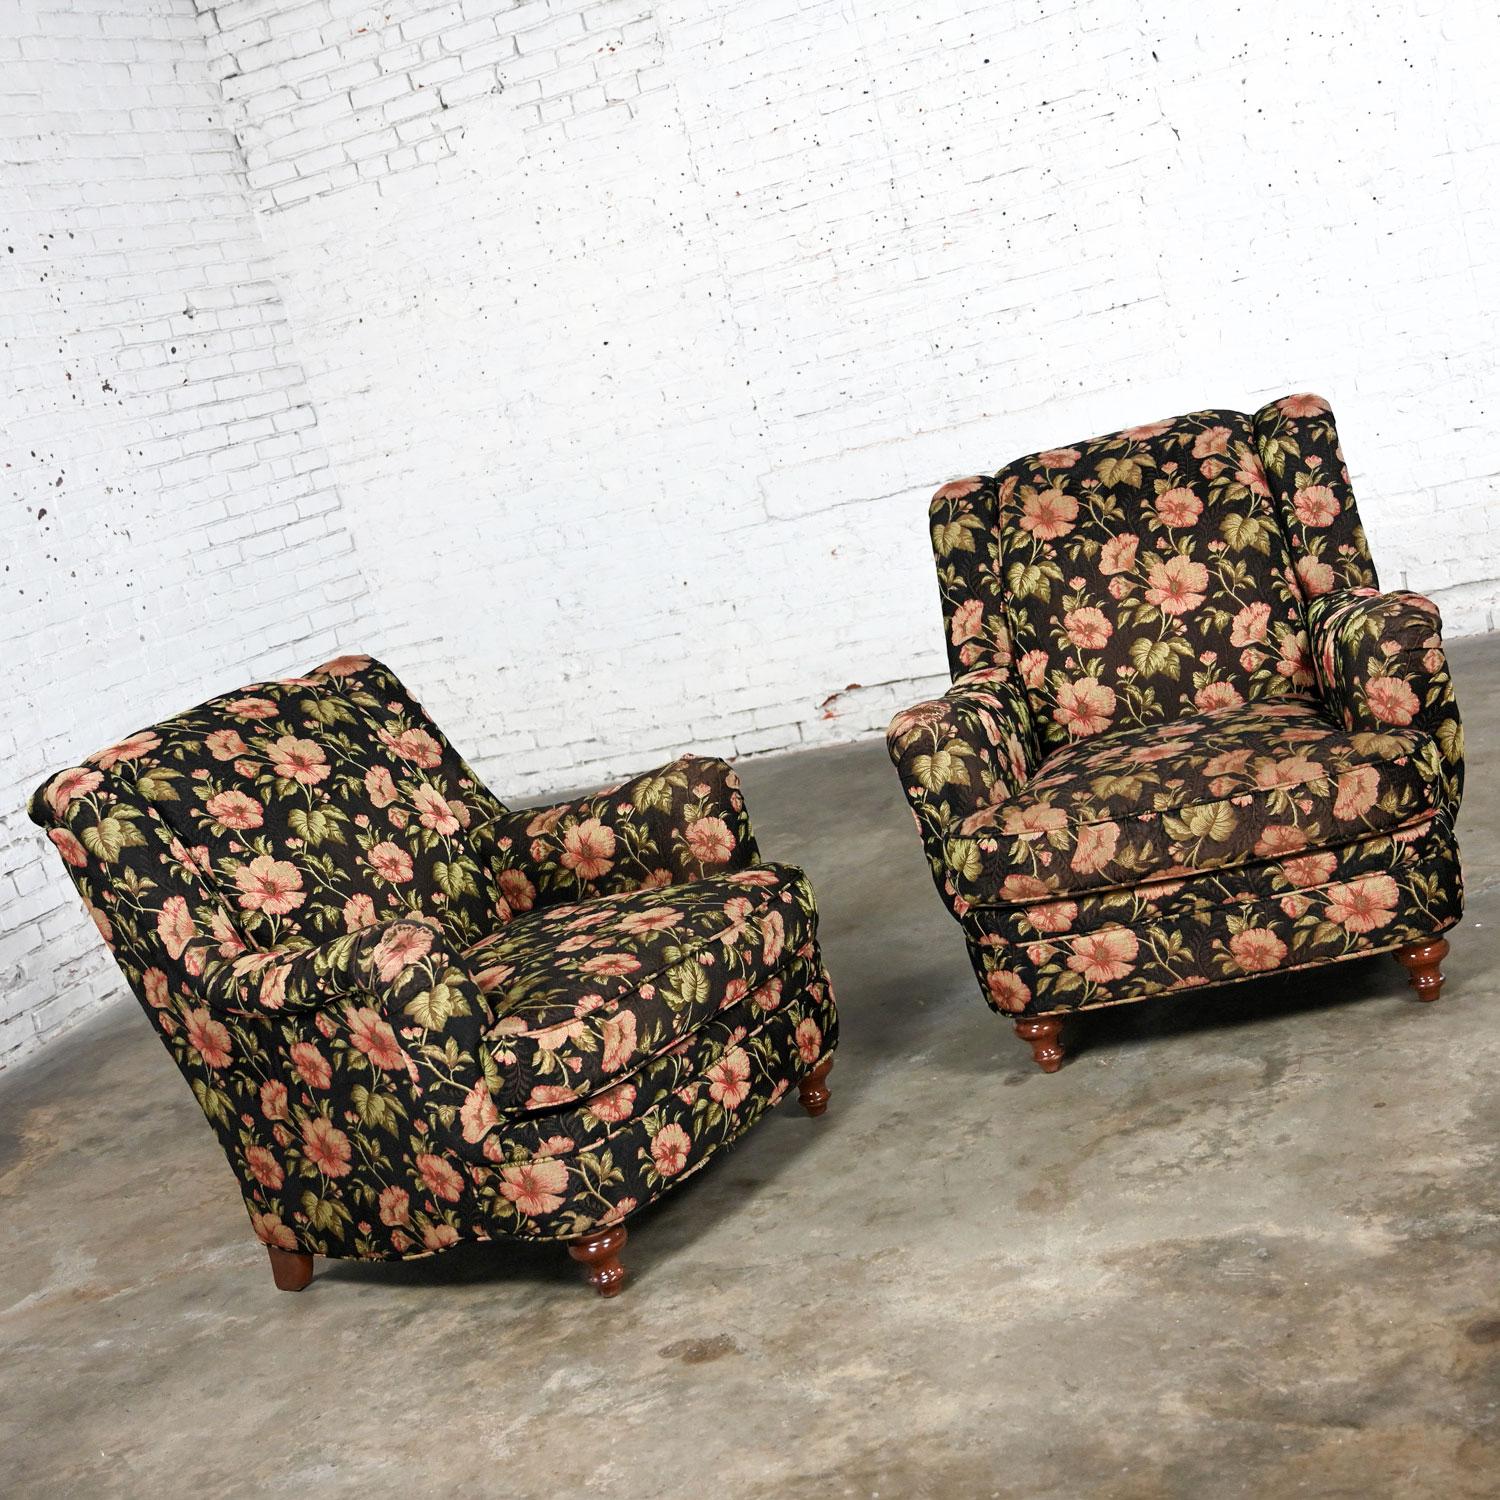 Cottagecore Style Pair Floral Lounge Chairs Sam Moore Furniture Division Hooker In Good Condition For Sale In Topeka, KS